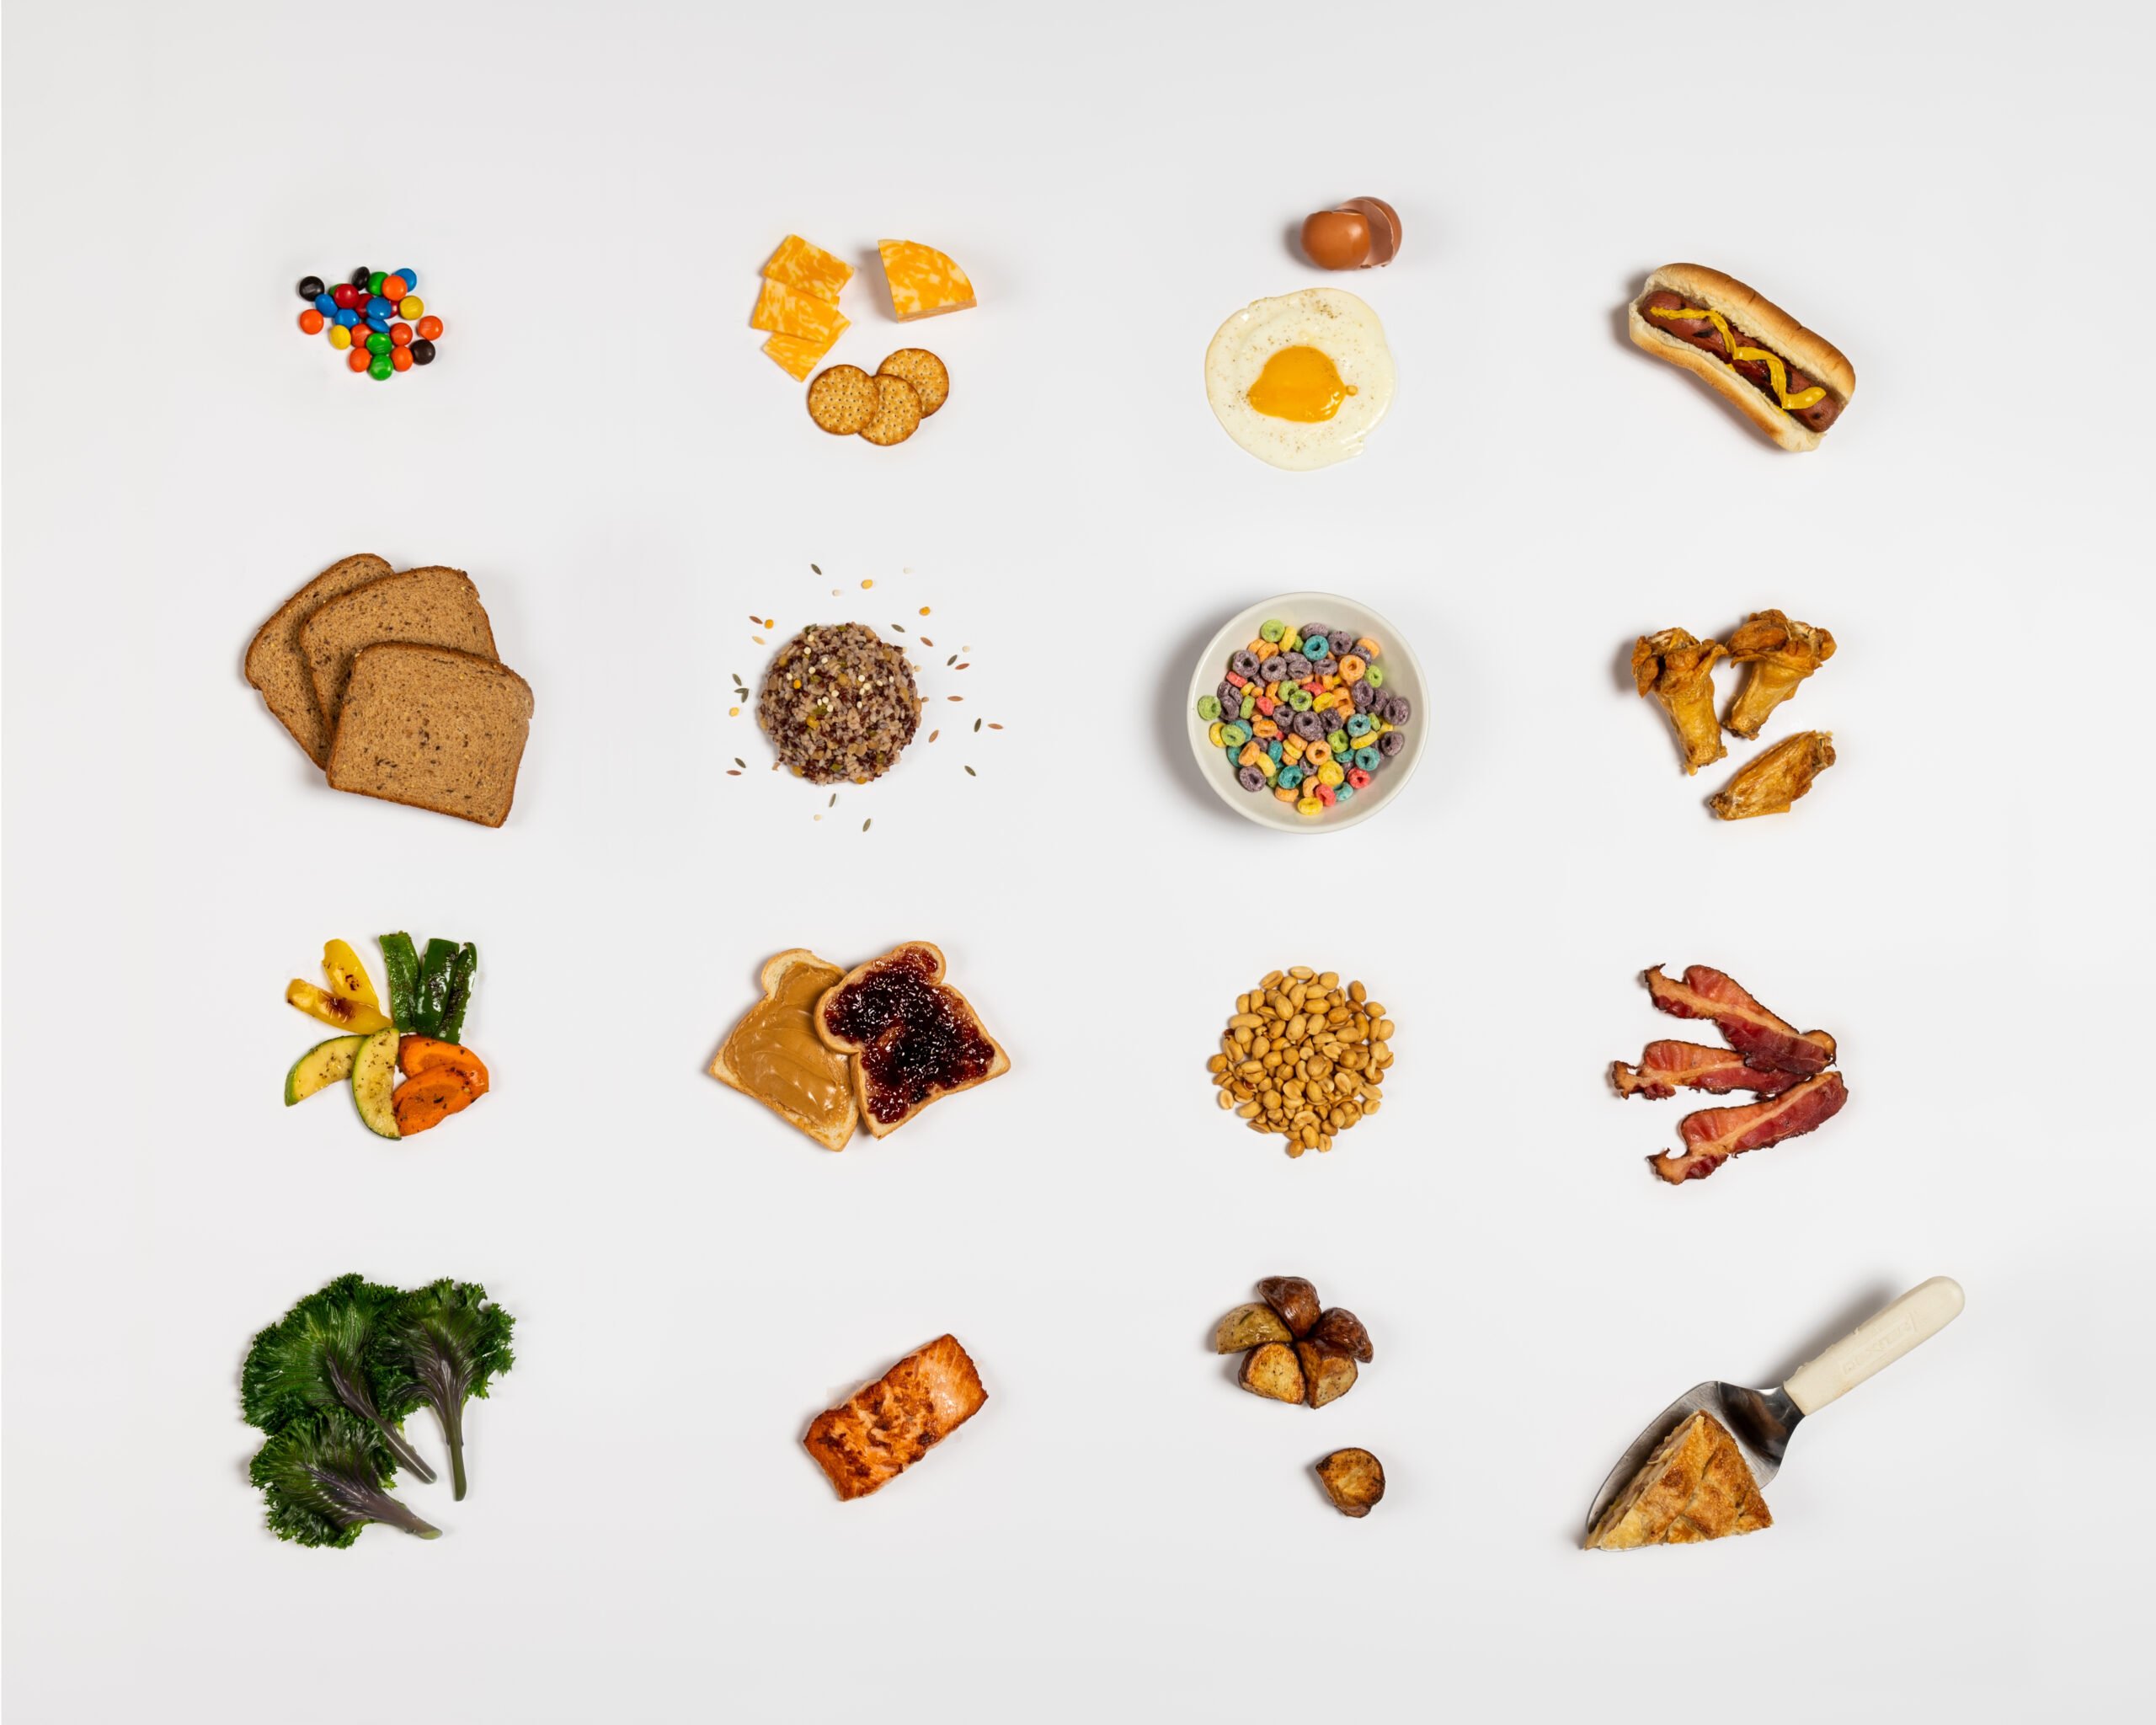 An array of foods on a white background